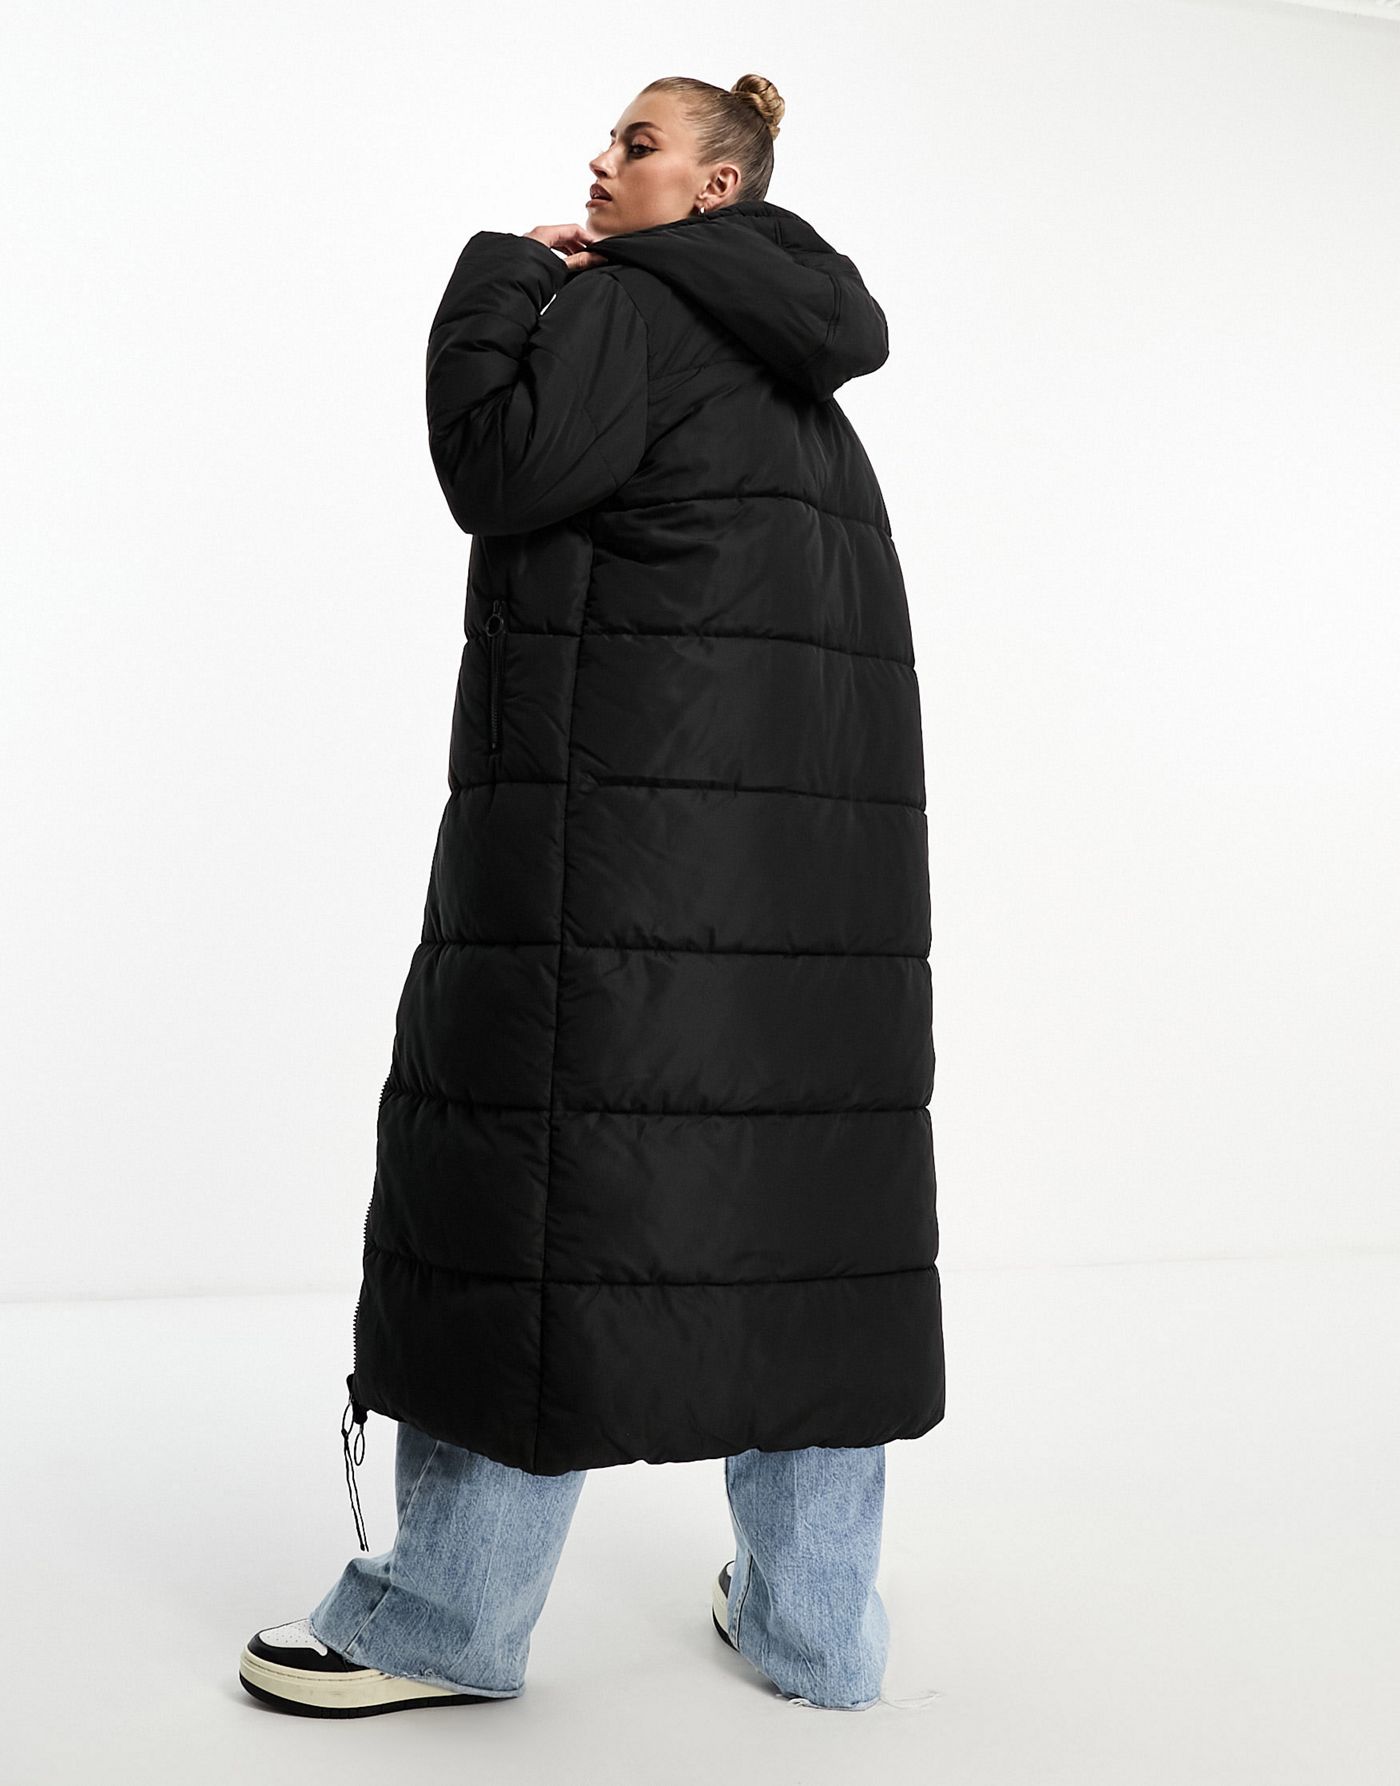 Gym King longline reversible puffer jacket in black and high shine 